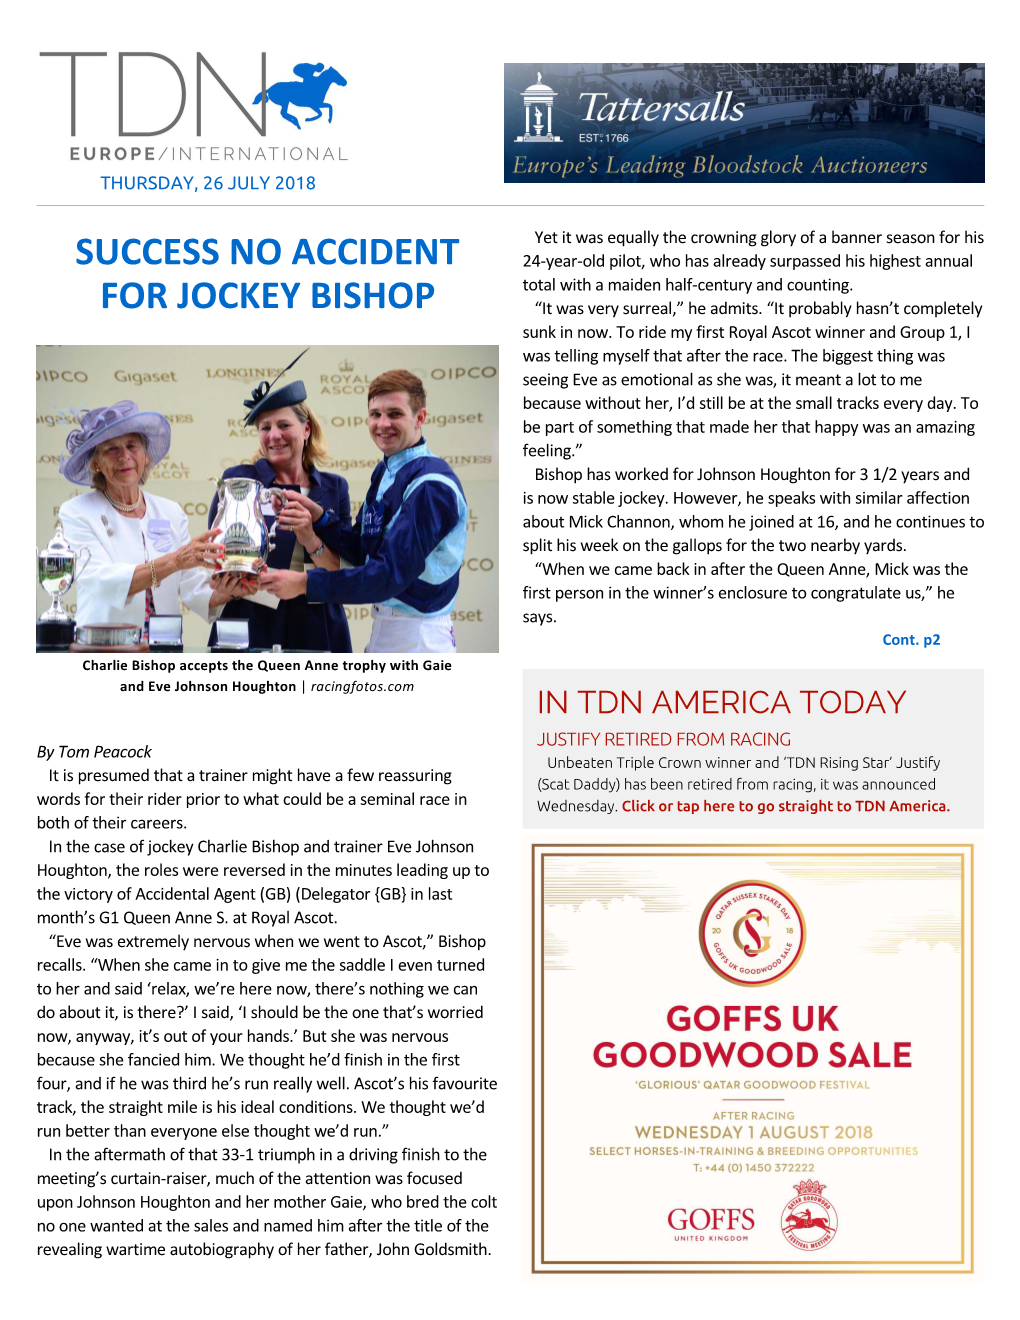 Success No Accident for Jockey Bishop Cont